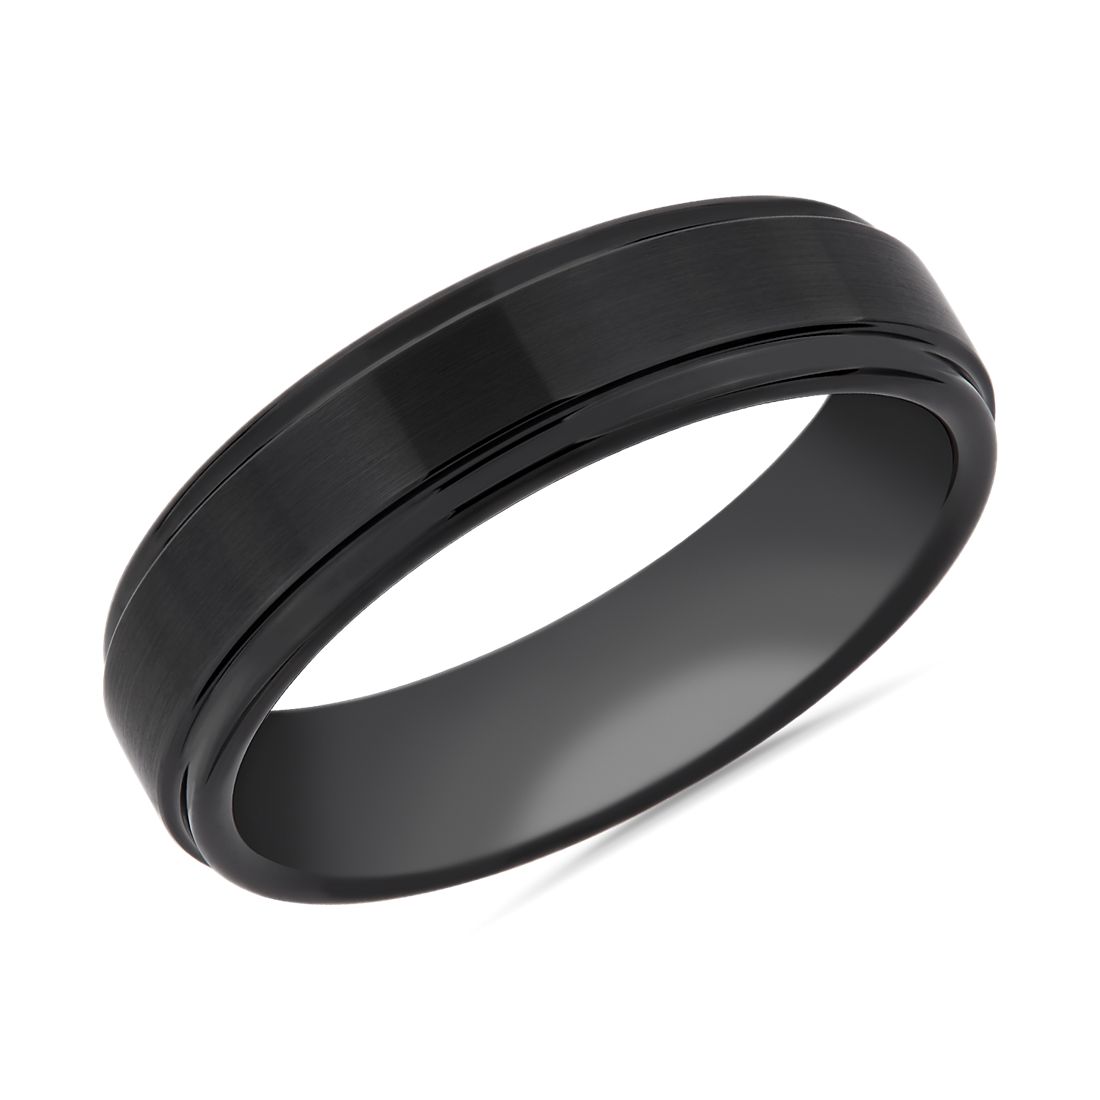 Brushed and Polished Comfort Fit Wedding Ring in Black Tungsten Carbide (6 mm)